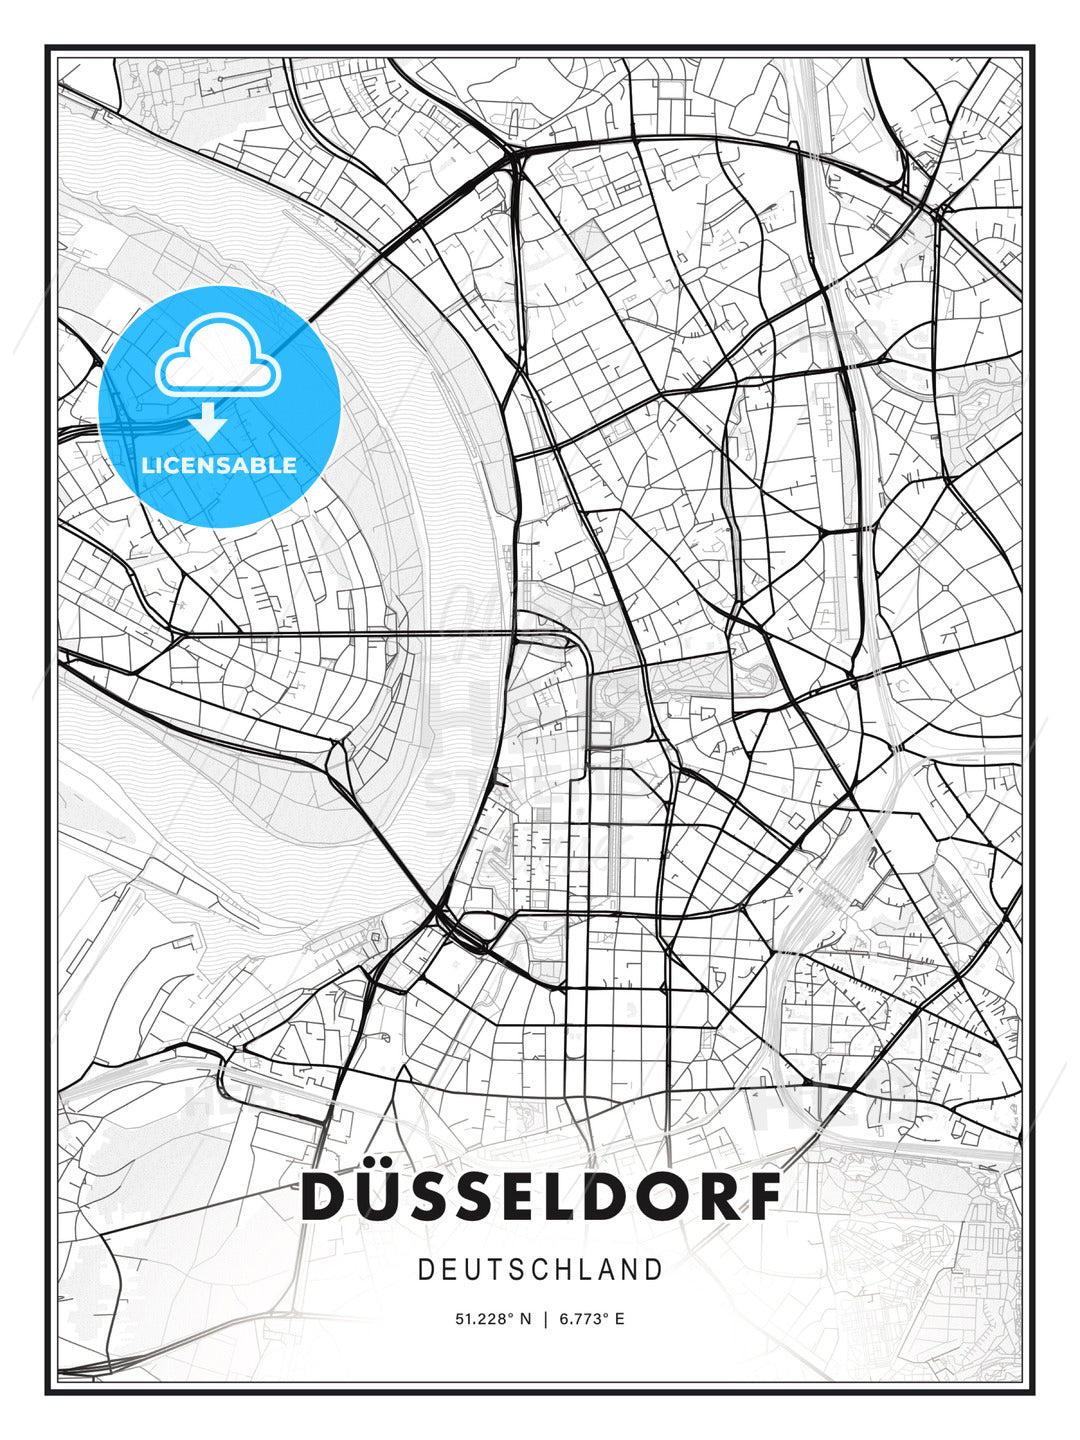 Düsseldorf, Germany, Modern Print Template in Various Formats - HEBSTREITS Sketches